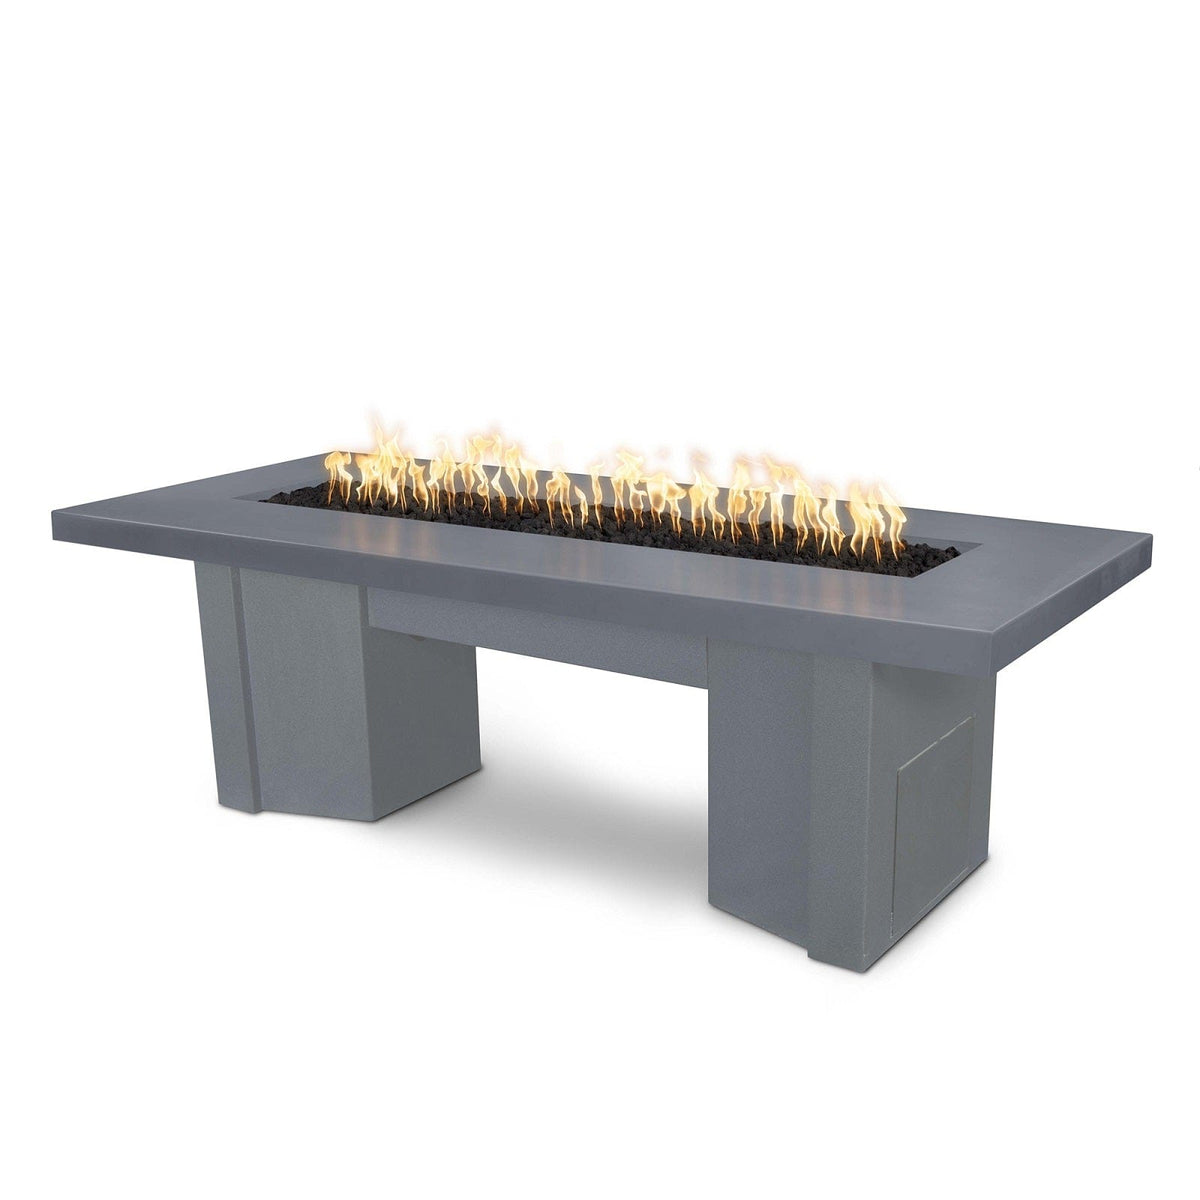 The Outdoor Plus Fire Features Gray (-GRY) / Gray Powder Coated Steel (-GRY) The Outdoor Plus 78&quot; Alameda Fire Table Smooth Concrete in Natural Gas - Match Lit with Flame Sense System / OPT-ALMGFRC78FSML-NG